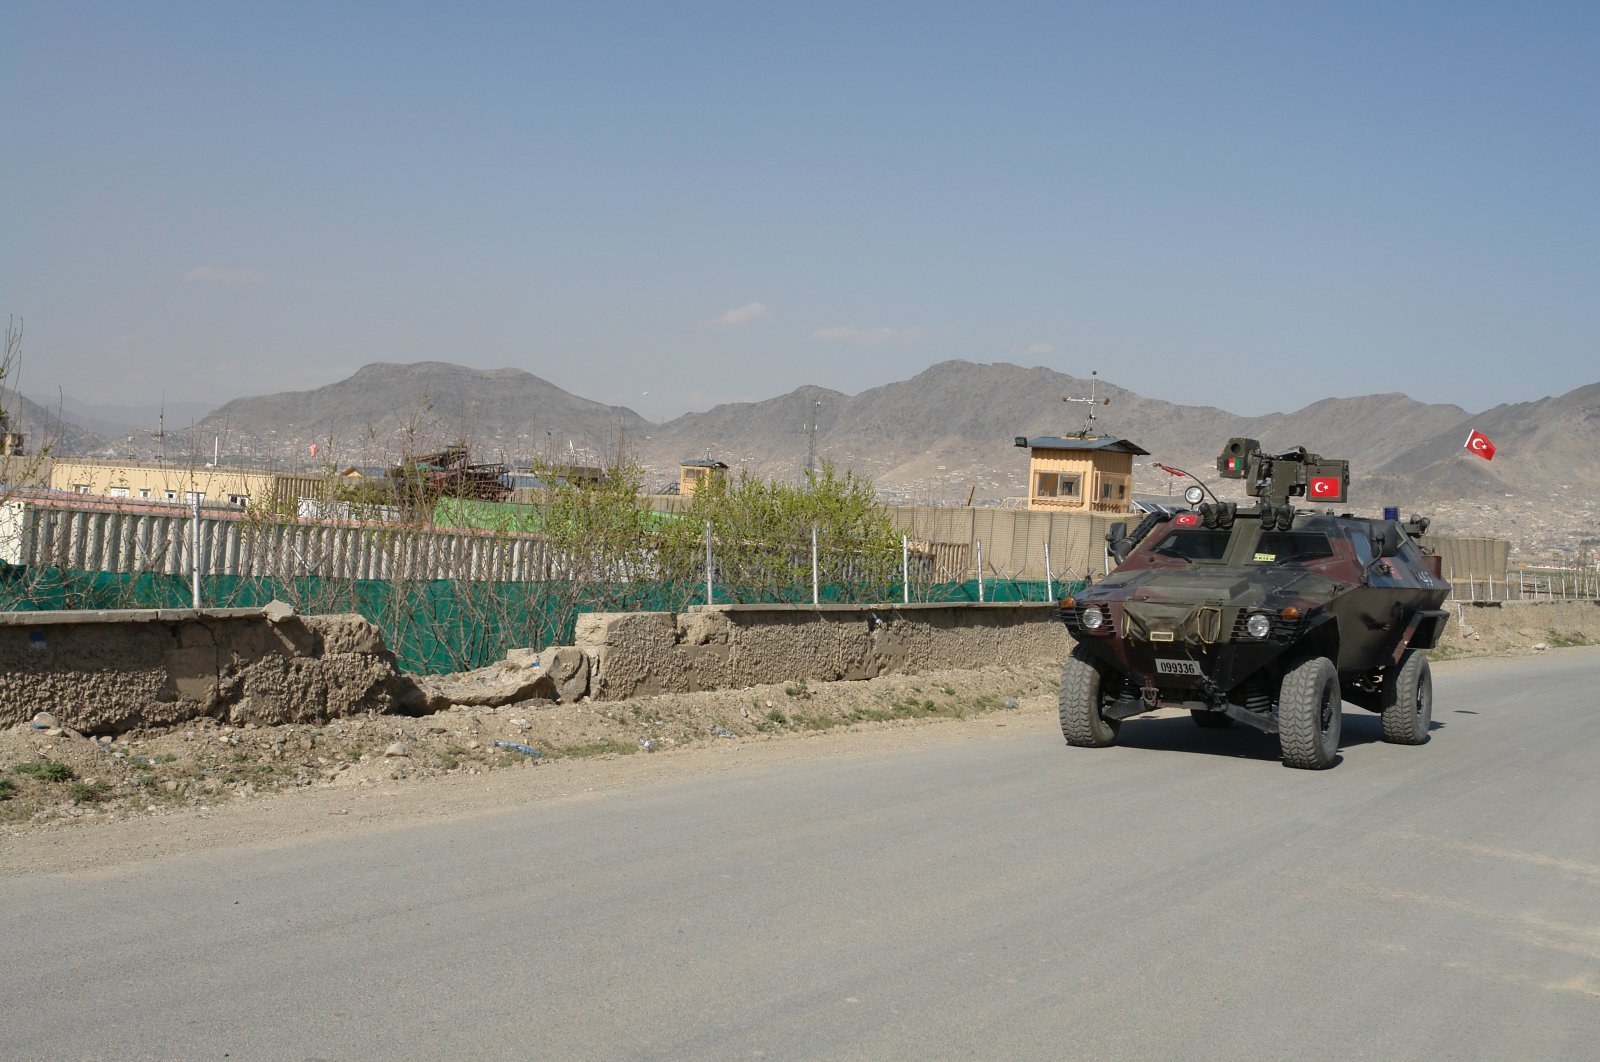 An armored personnel carrier of NATO military in Afghanistan, April 12, 2012. (Shutterstock)
